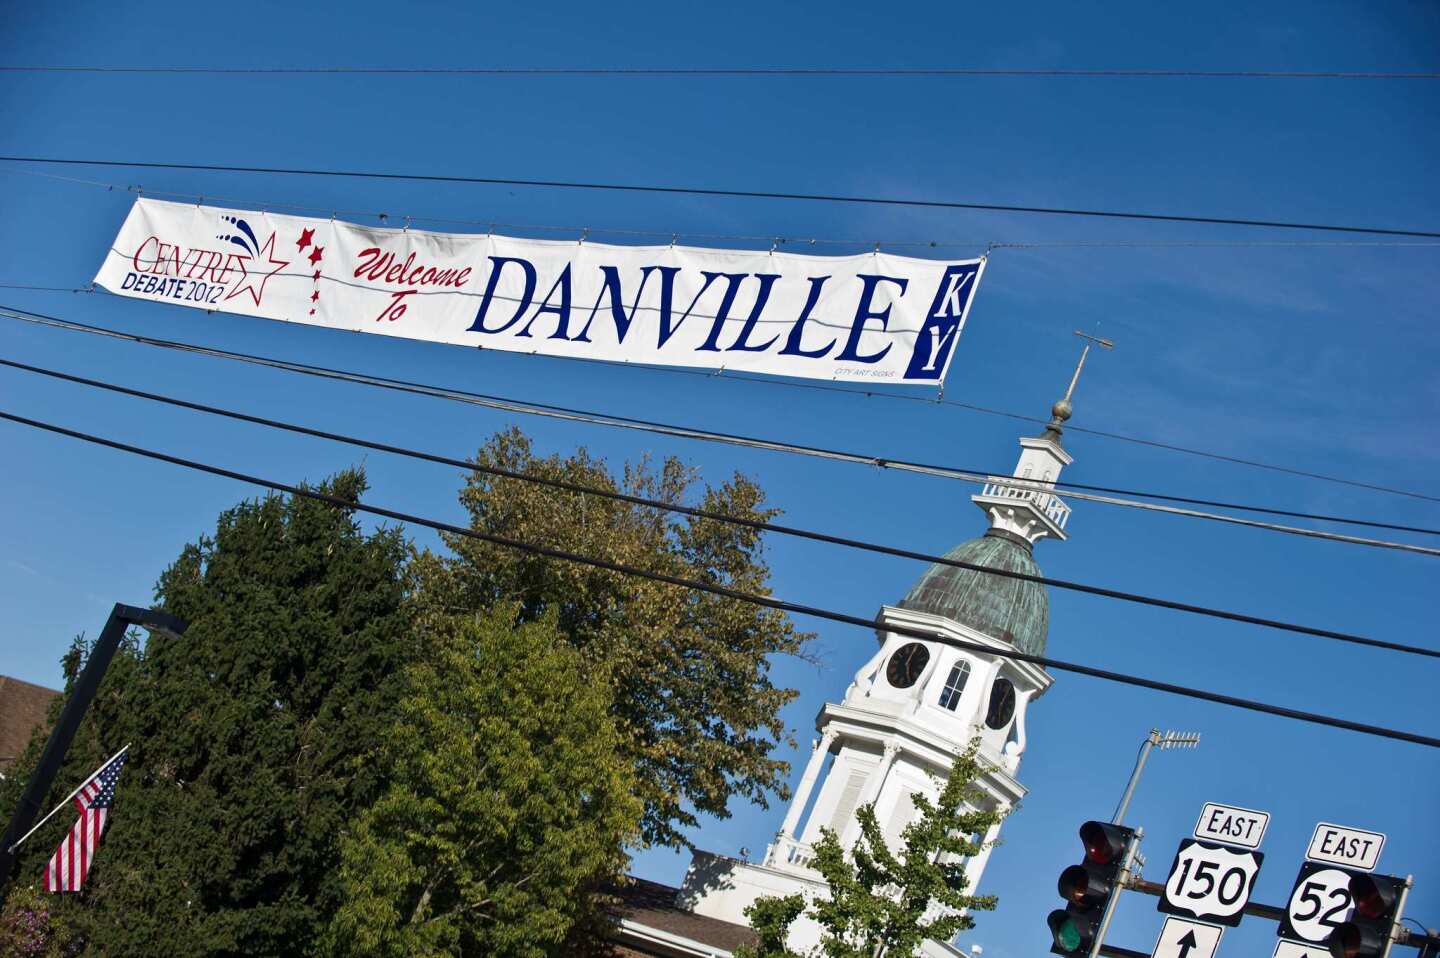 Welcome to Danville